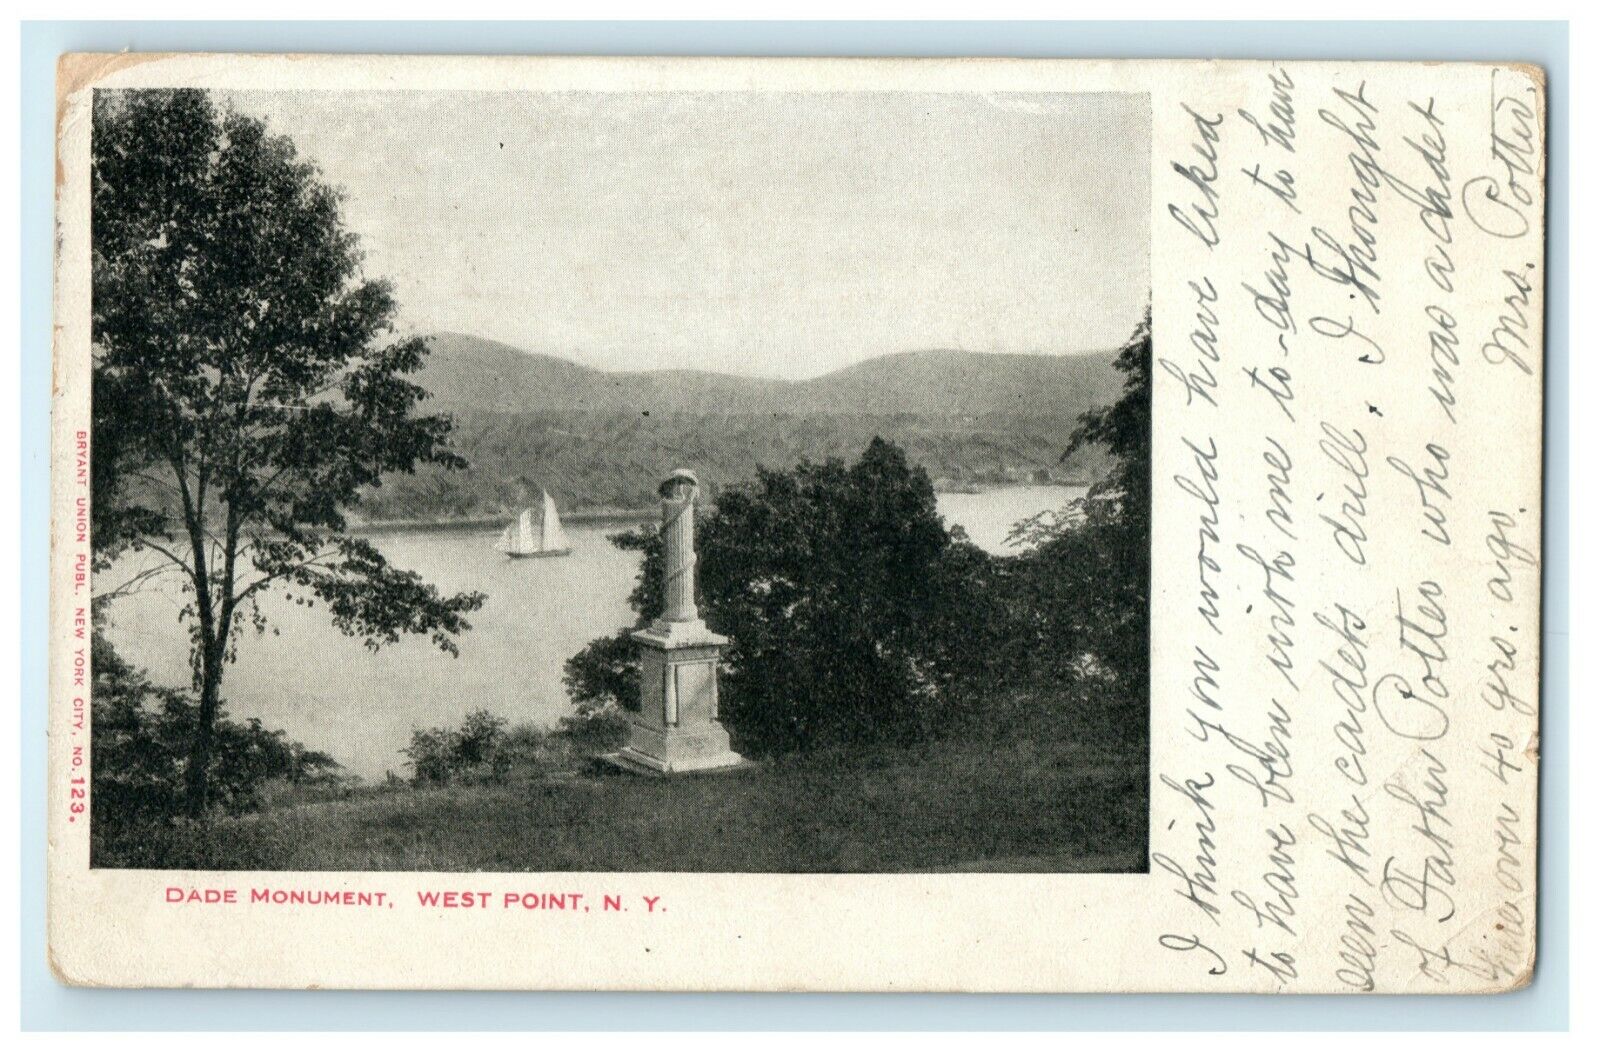 1906 Dade Monument West Point New York NY Cadet Drill Military Postcard